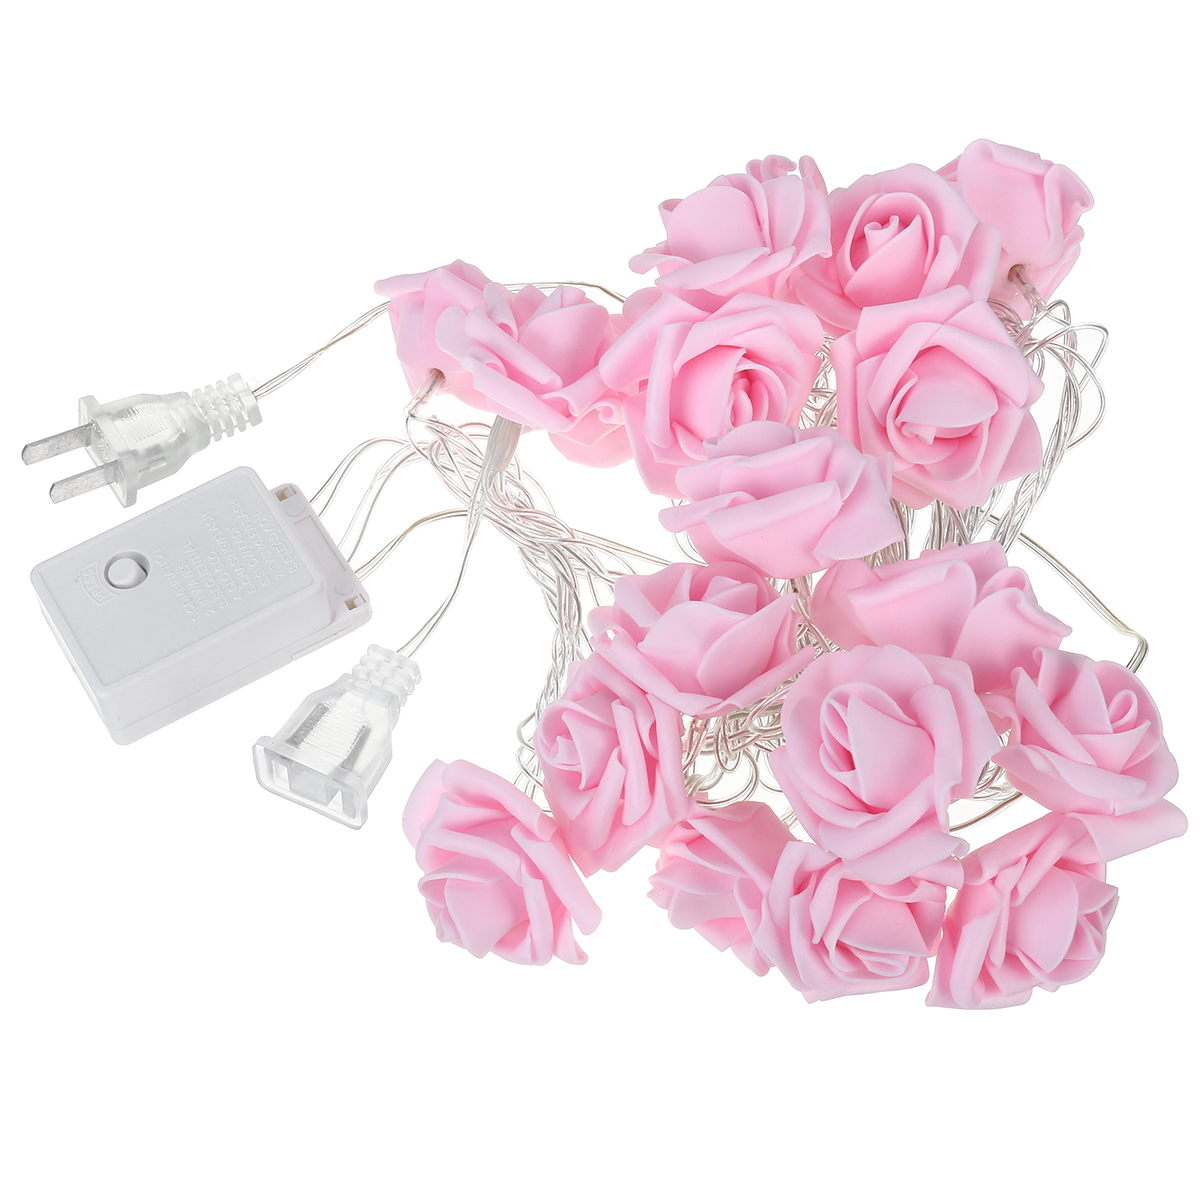 3M-6M-LED-Artificia-Rose-Flower-Fairy-String-Light-Home-Party-Wedding-Holiday-Christmas-Decor-Lamp-A-1715953-4